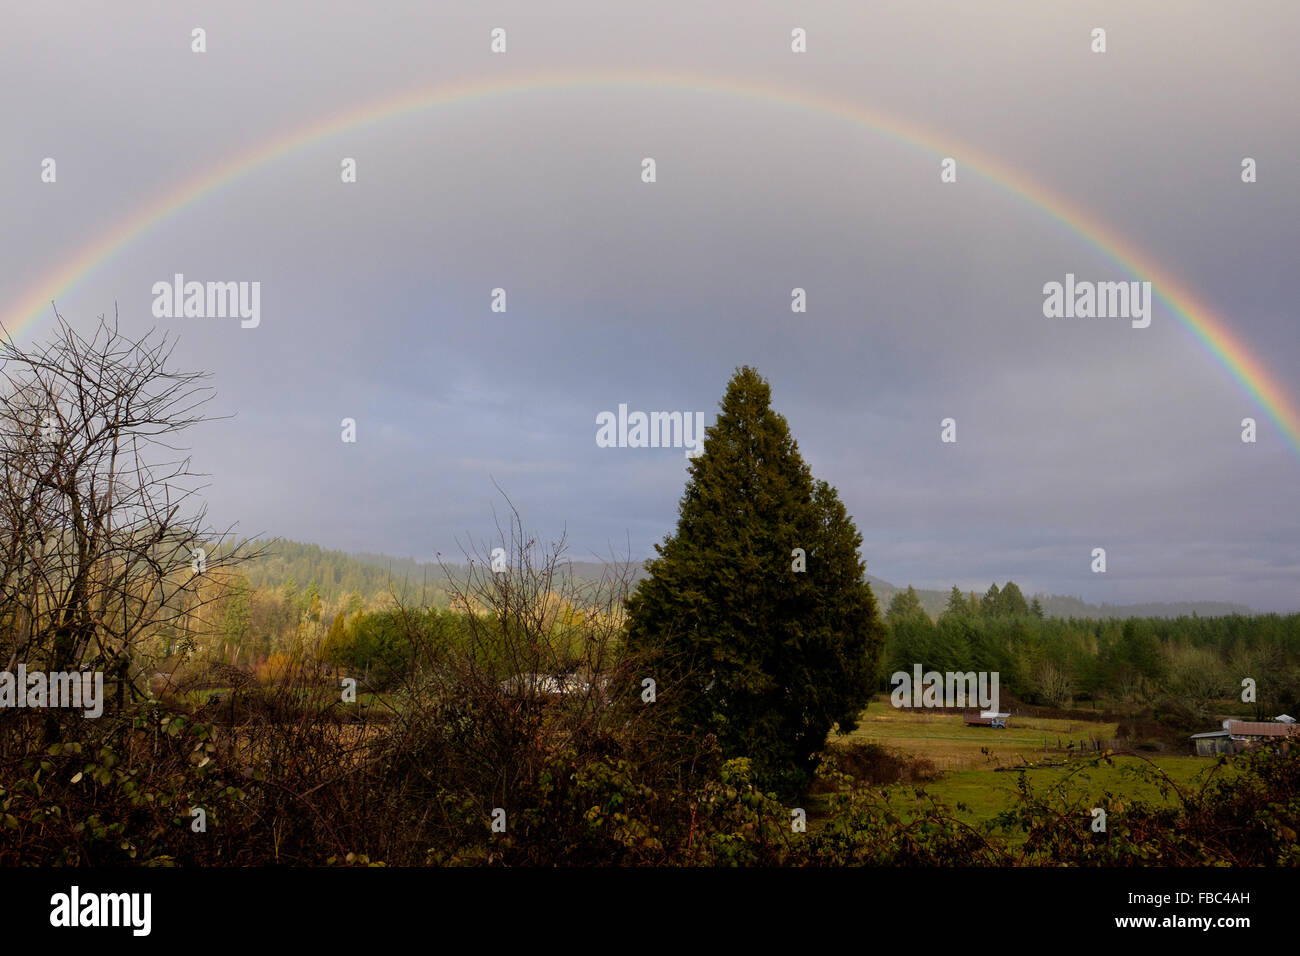 Rainbow stretching across the sky after a big rainstorm in Oregon. Stock Photo